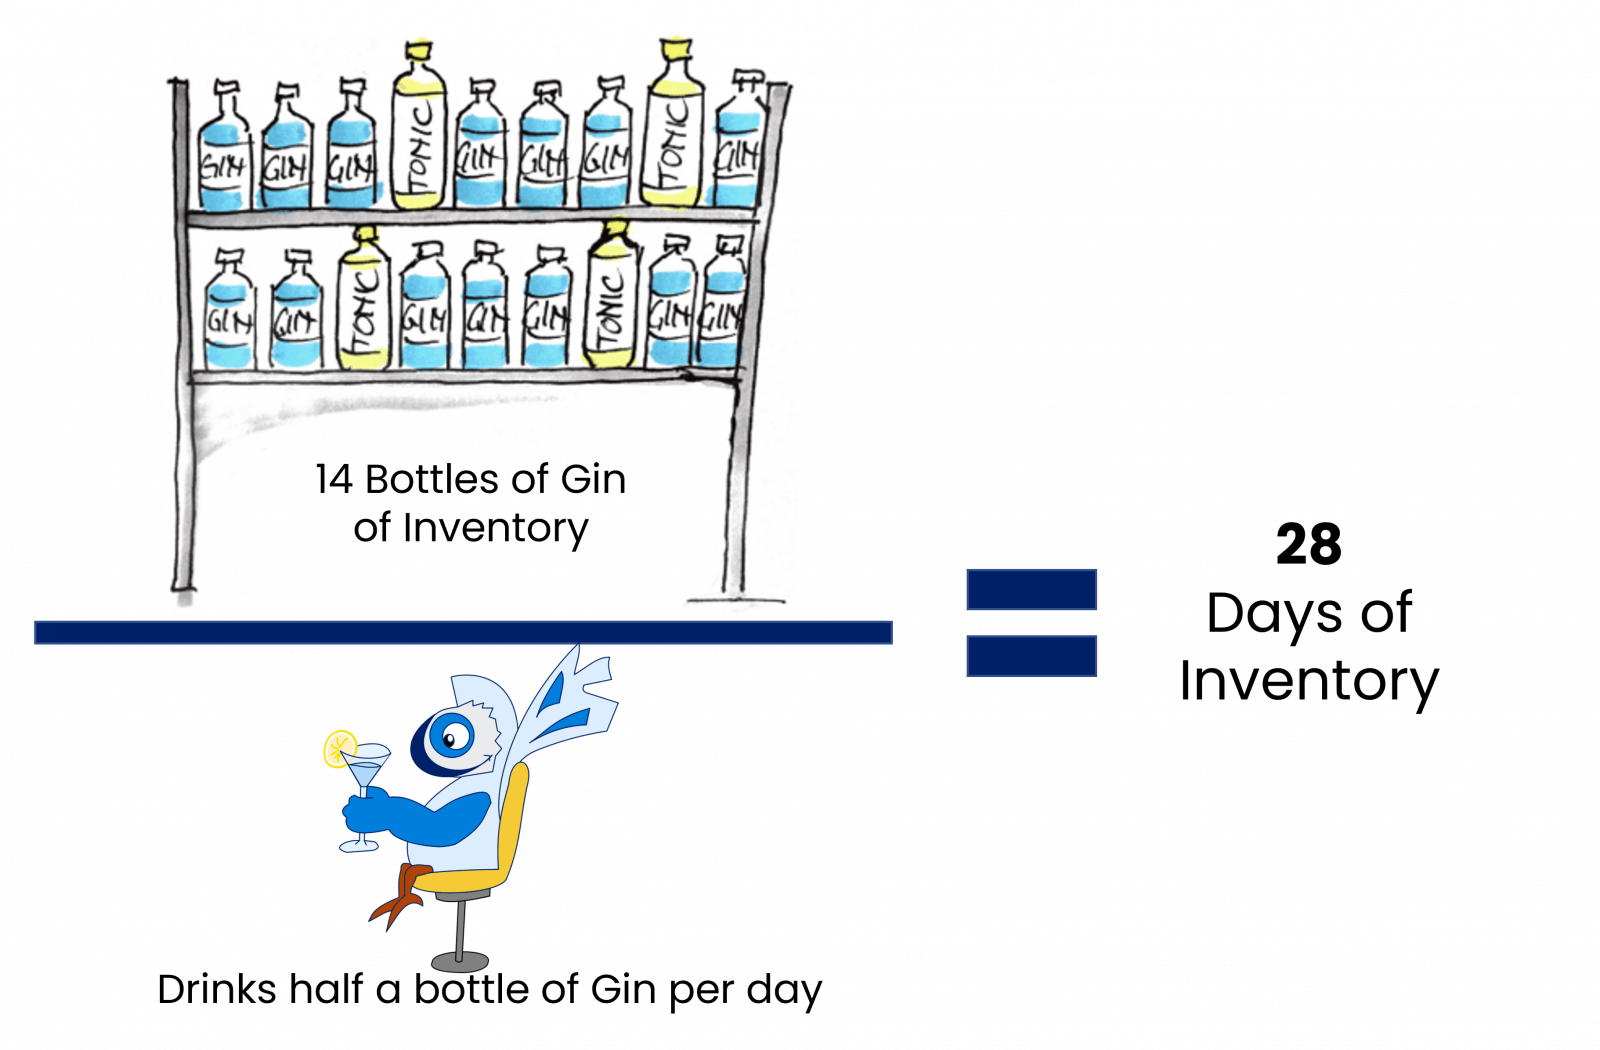 Understand DOI – Days of Inventory by checking your Gin stock